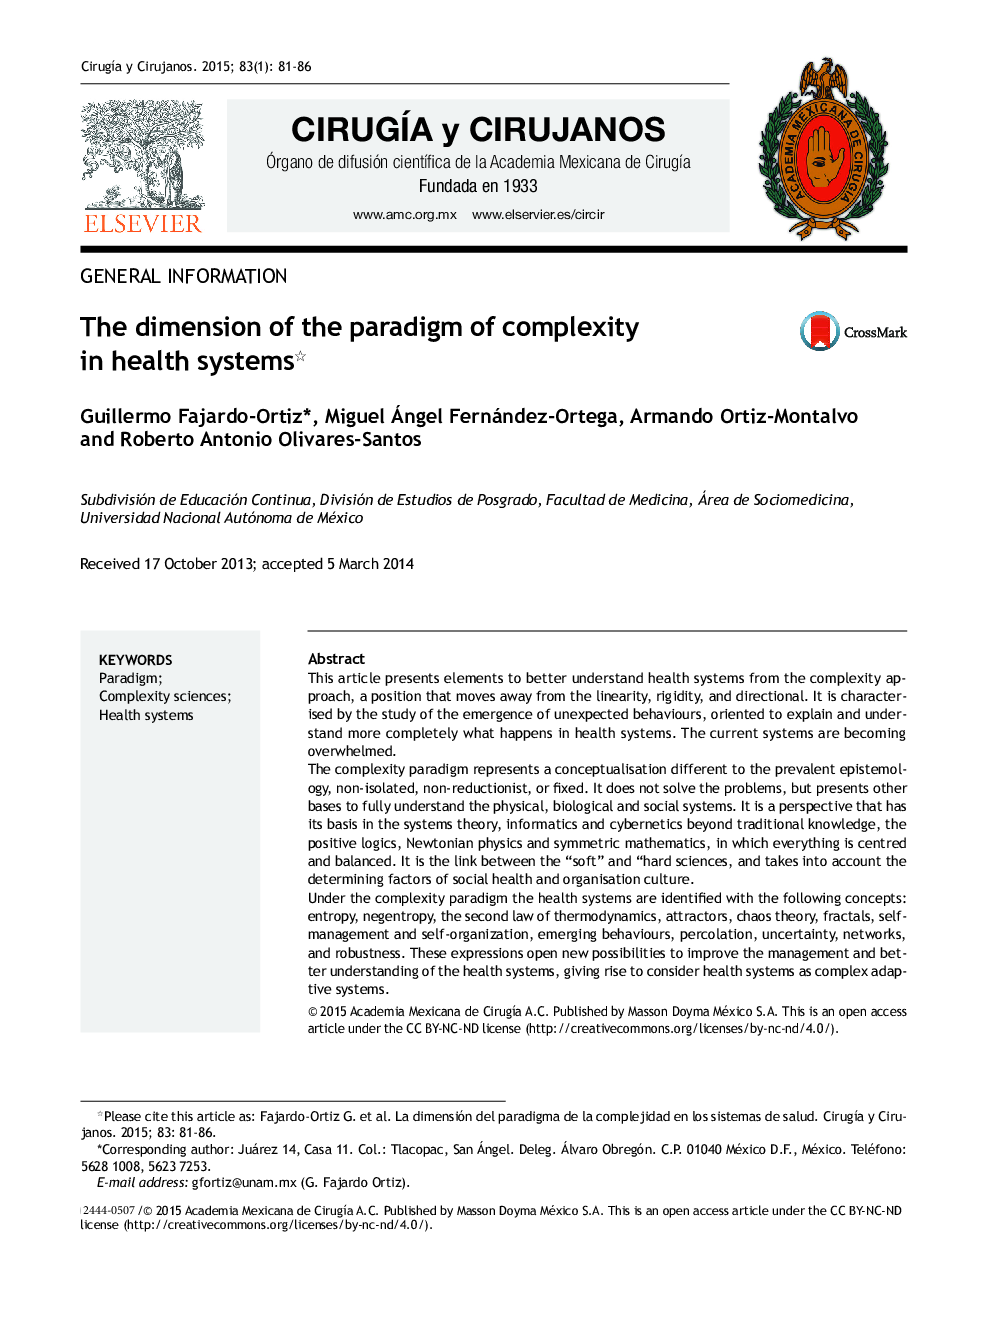 The dimension of the paradigm of complexity in health systems 